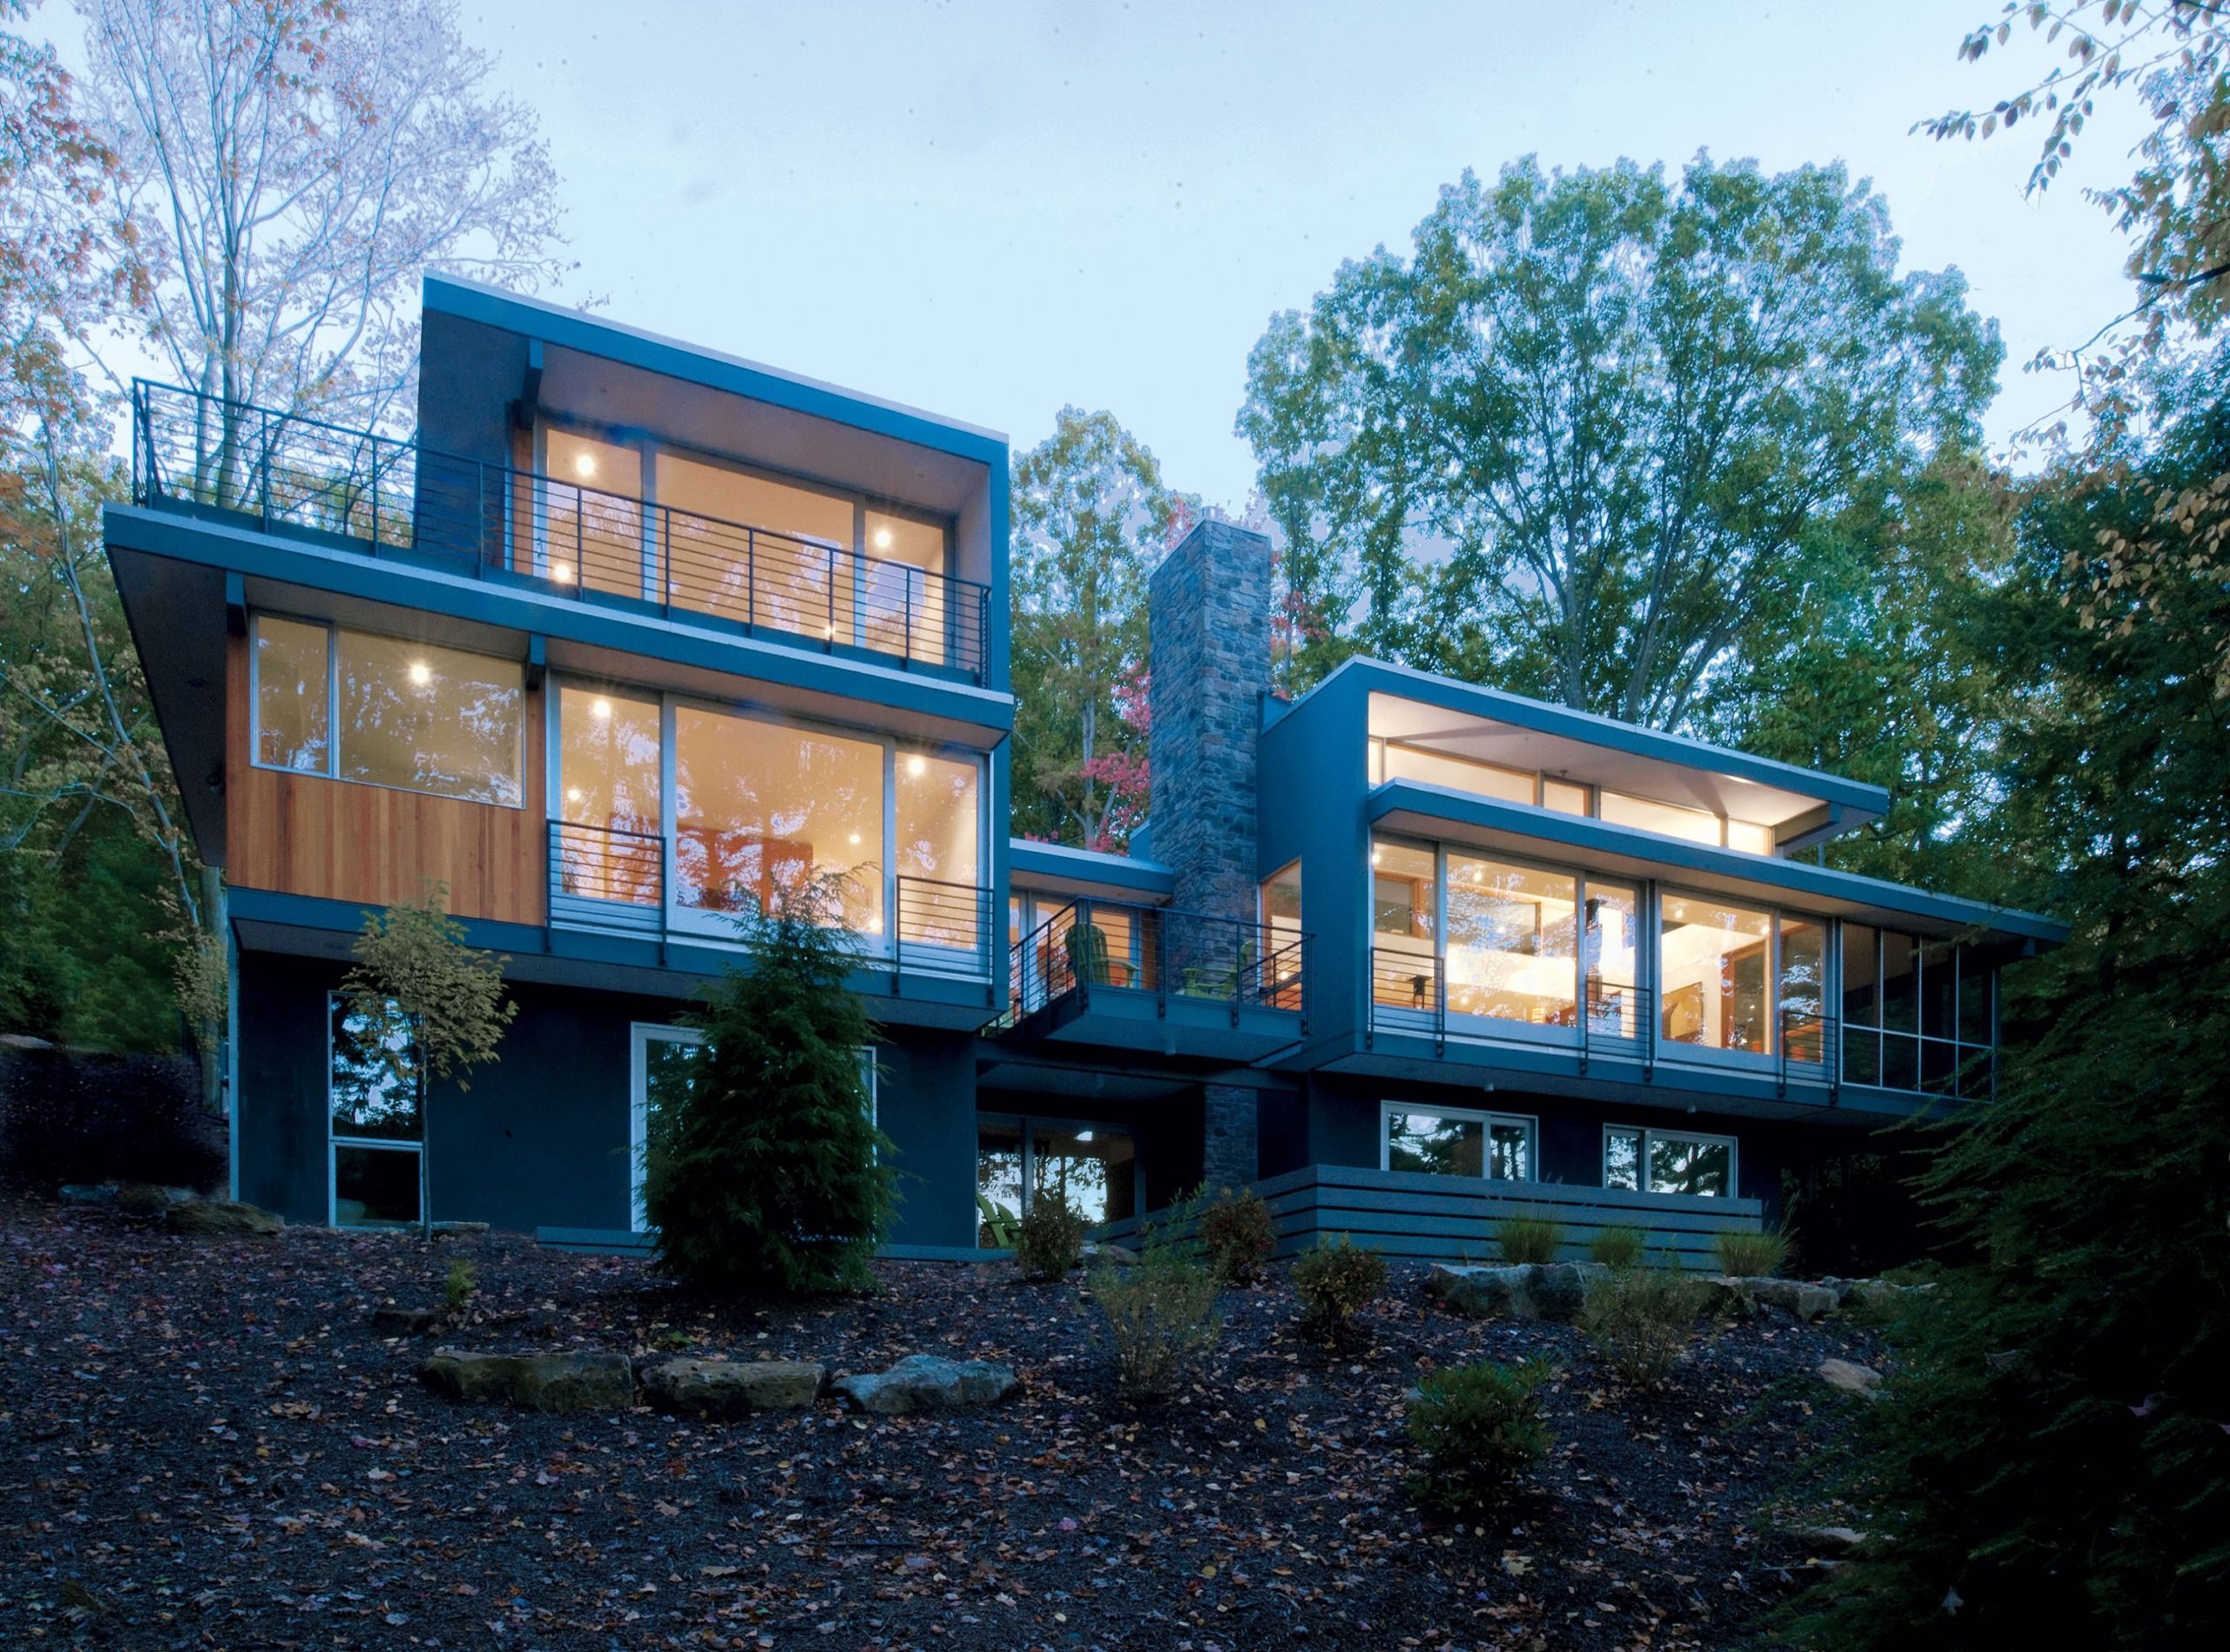 A Keanu Reeves Movie Inspired This Lakeside Retreat in Maryland - Washingto...